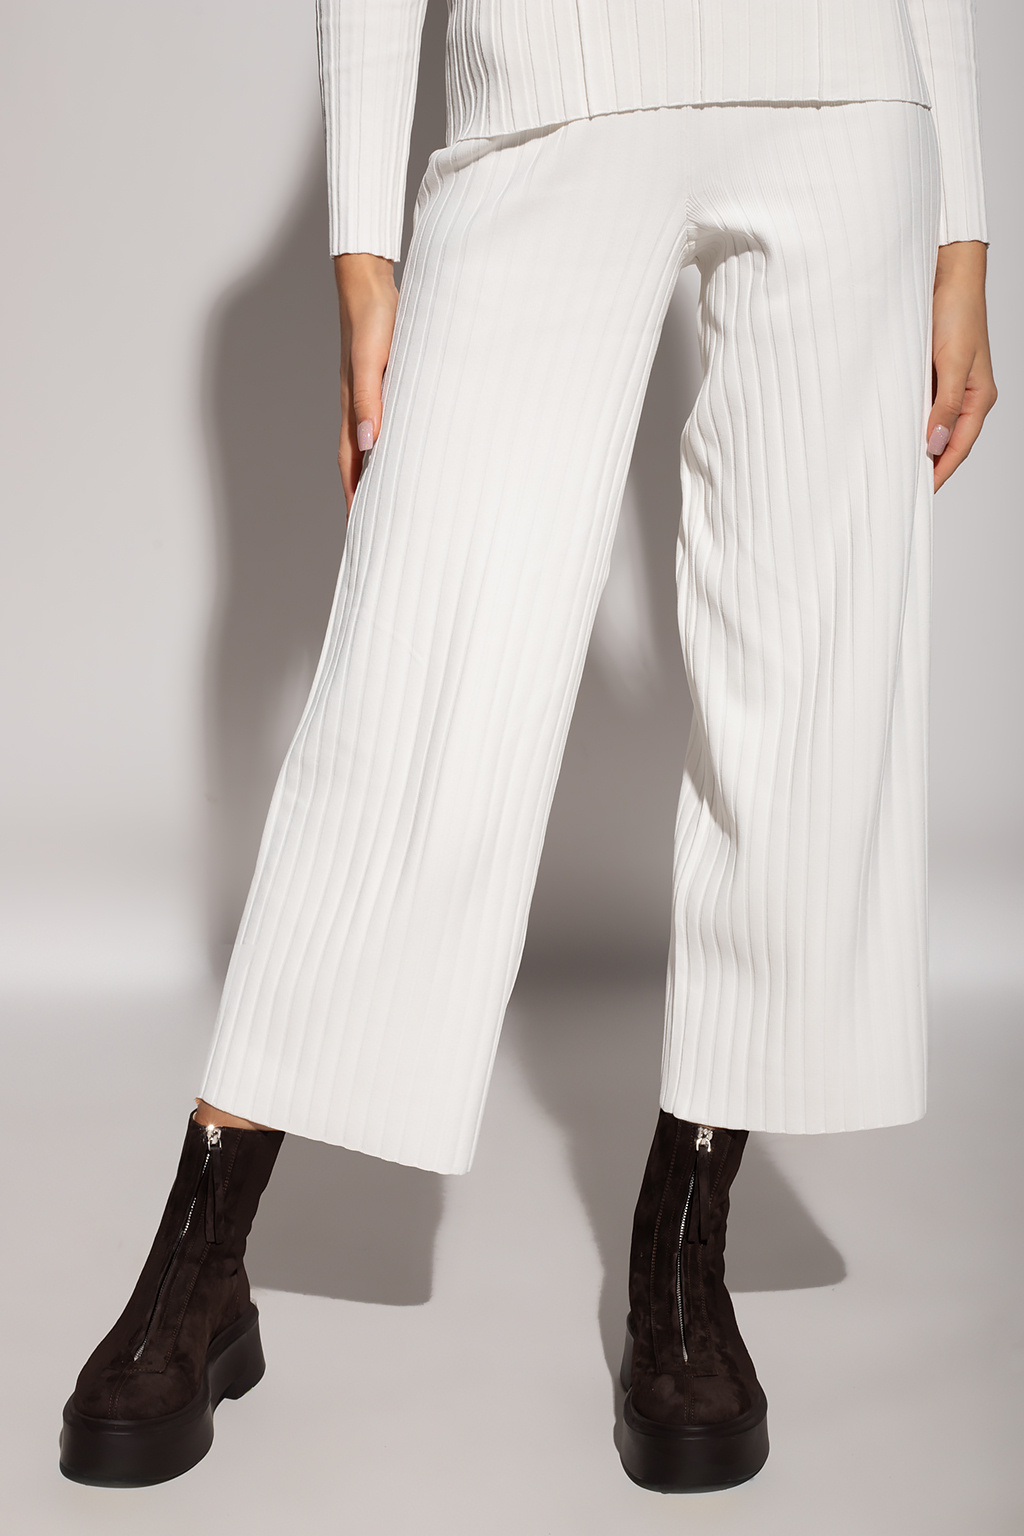 Proenza Schouler White Label Ribbed cullotes